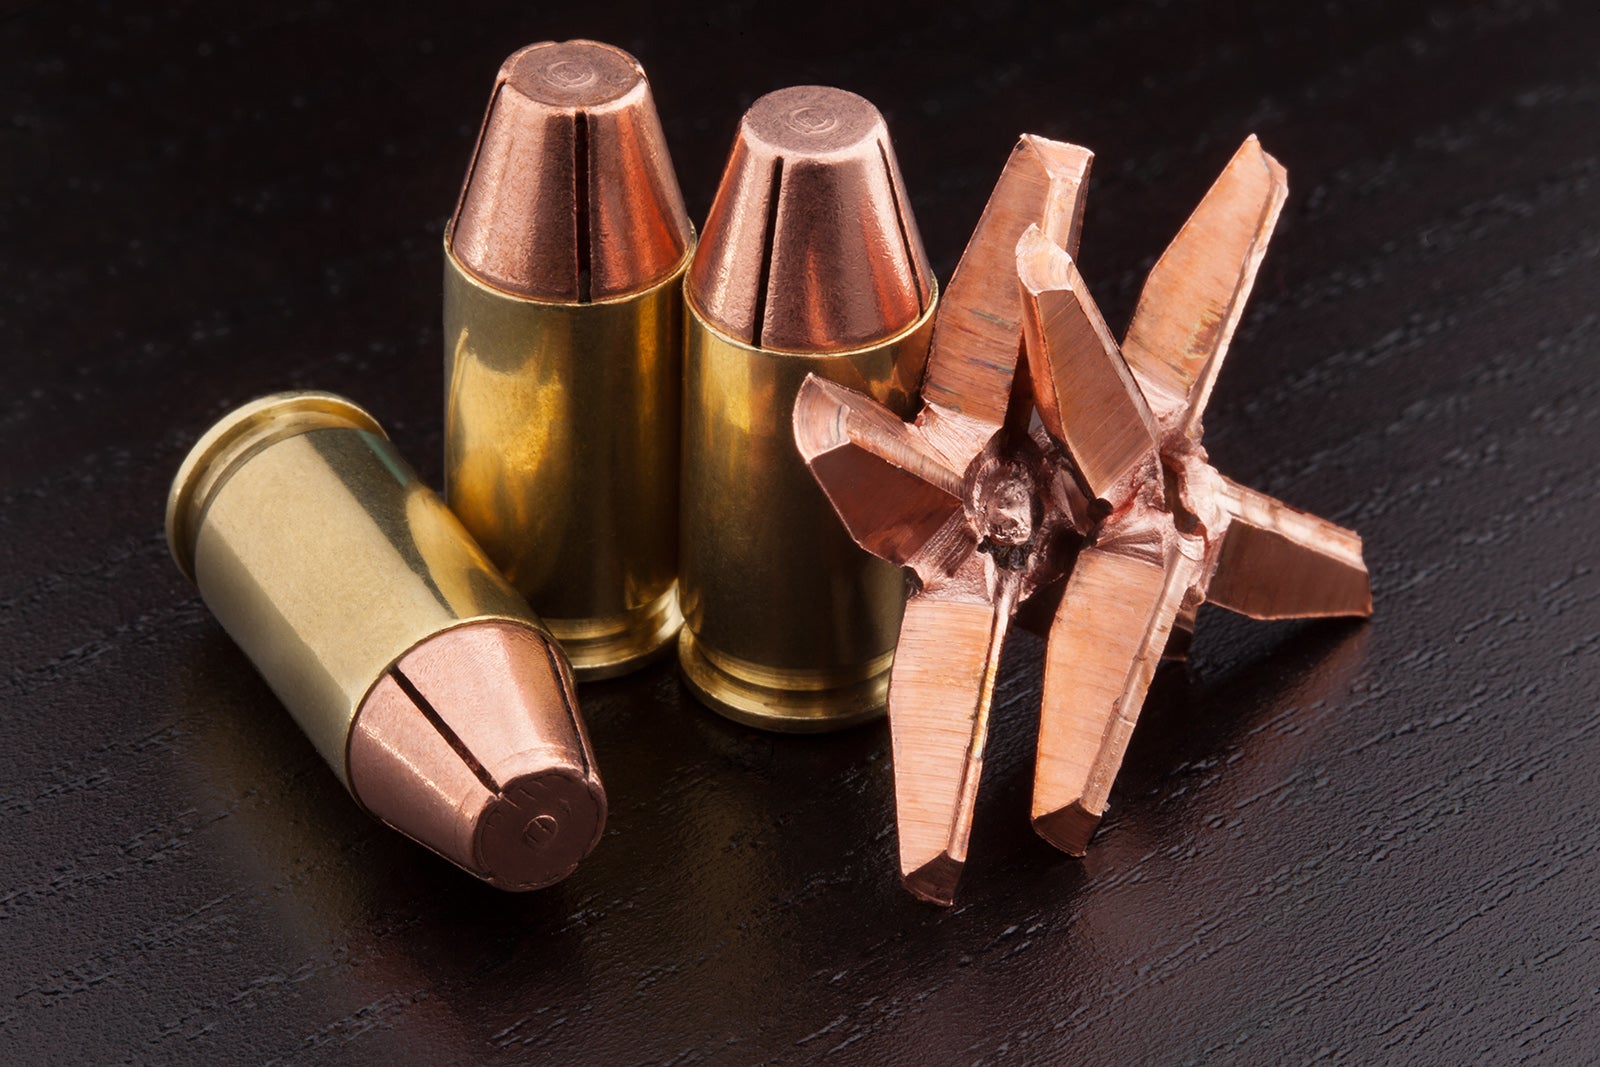 These bullets were shot into a gelatin block at five yards. Even from 